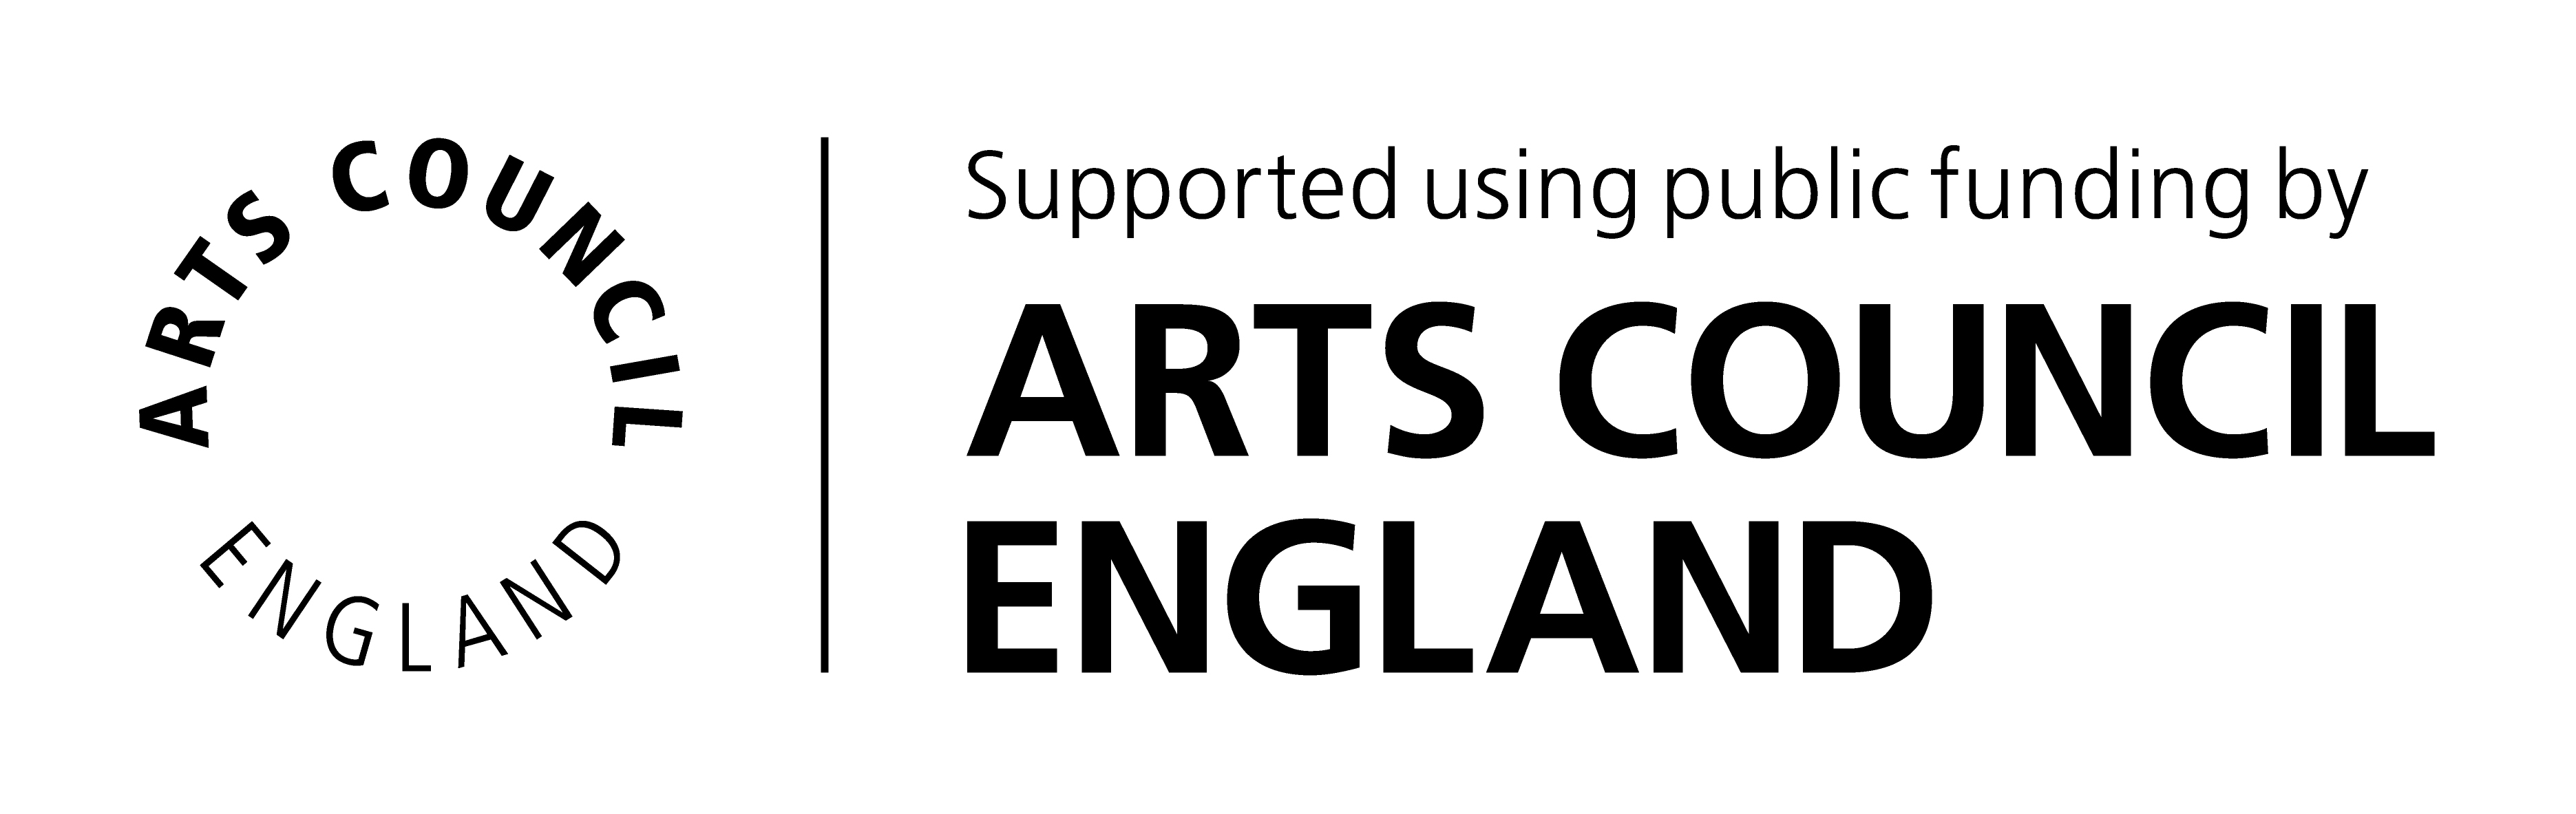 With thanks to Arts Council England